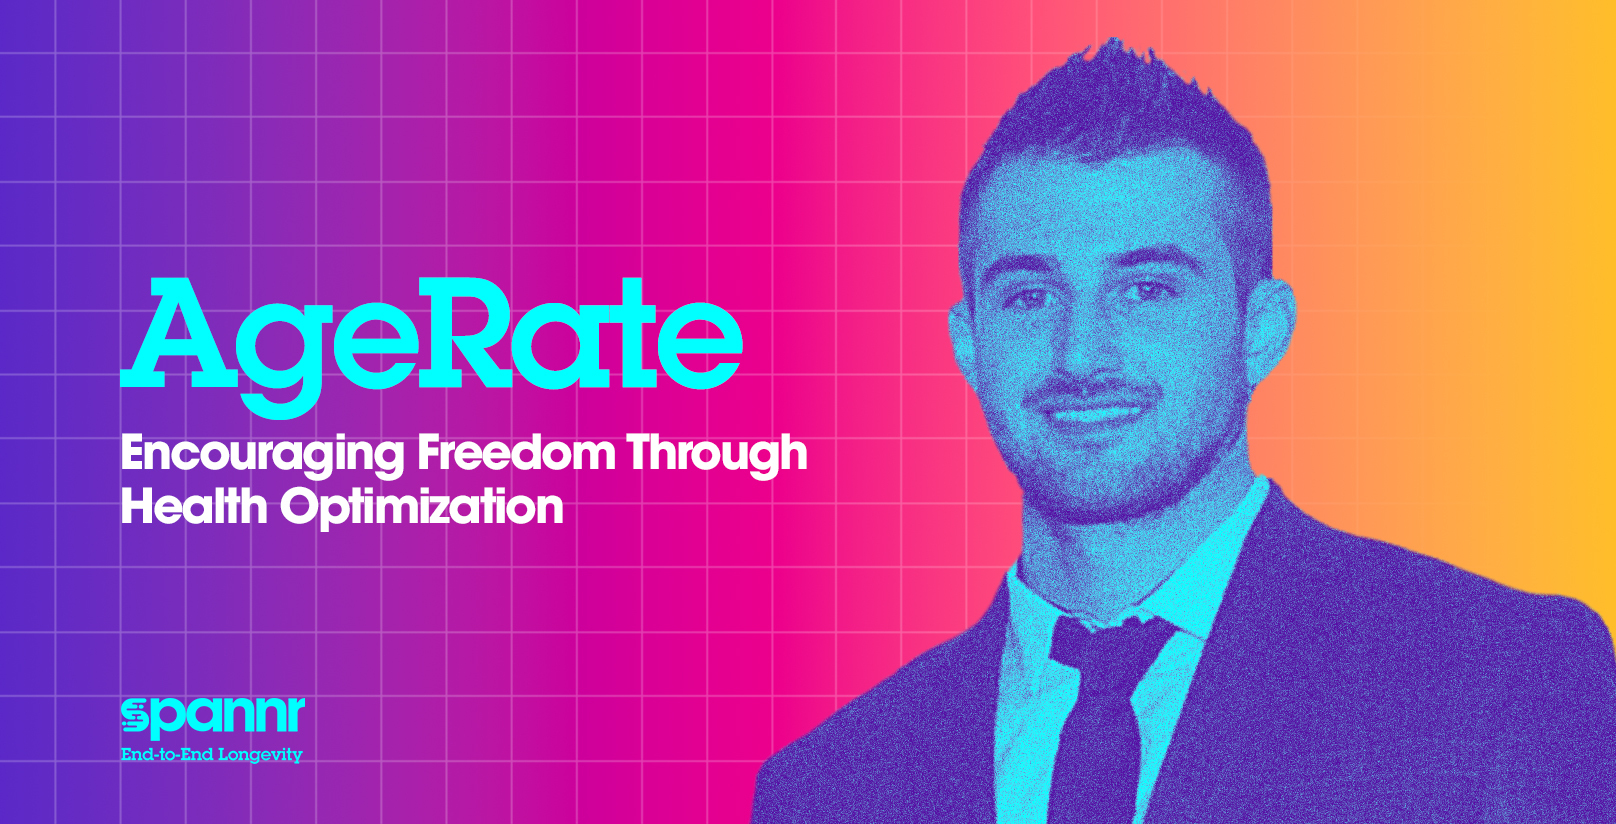 AgeRate: Encouraging Freedom Through Health Optimization